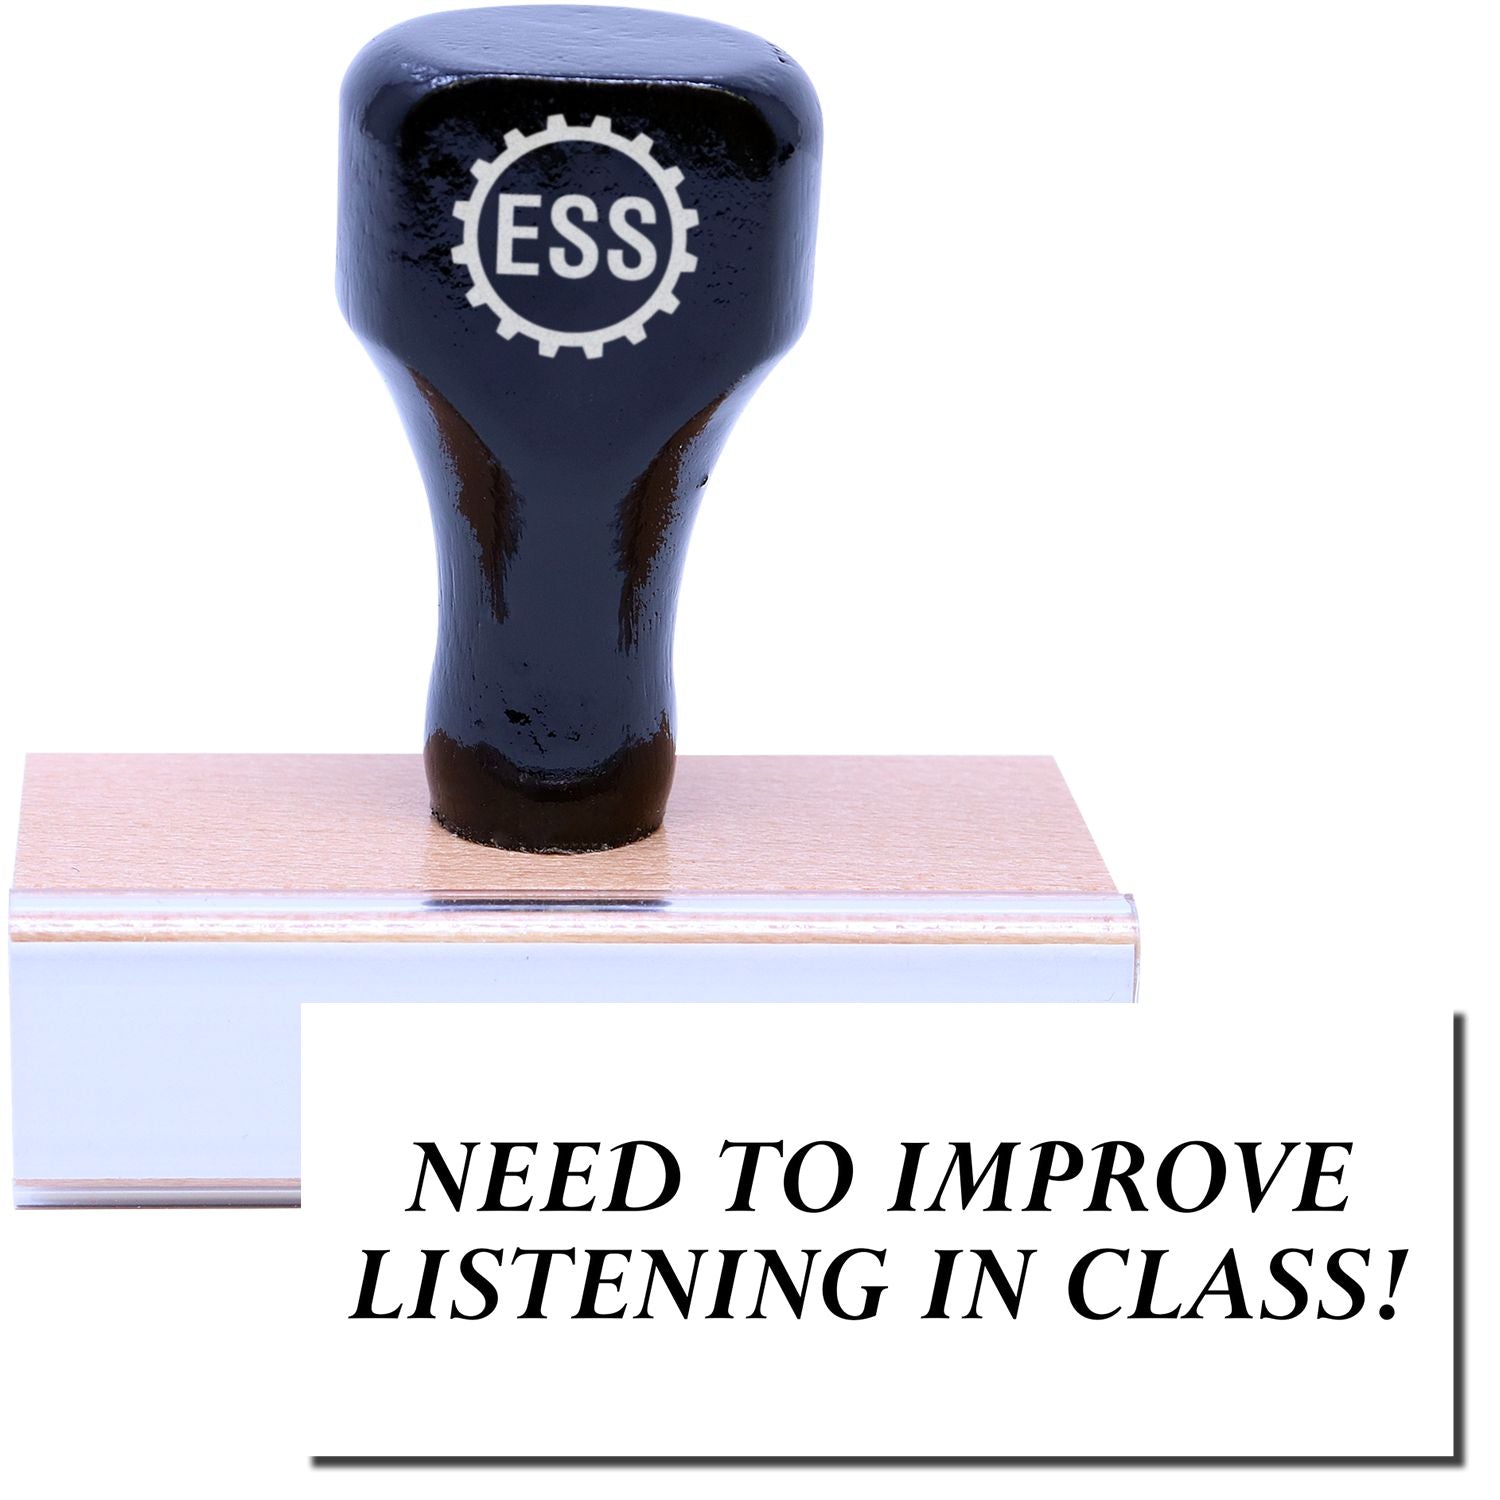 A stock office rubber stamp with a stamped image showing how the text "NEED TO IMPROVE LISTENING IN CLASS!" in a large font is displayed after stamping.